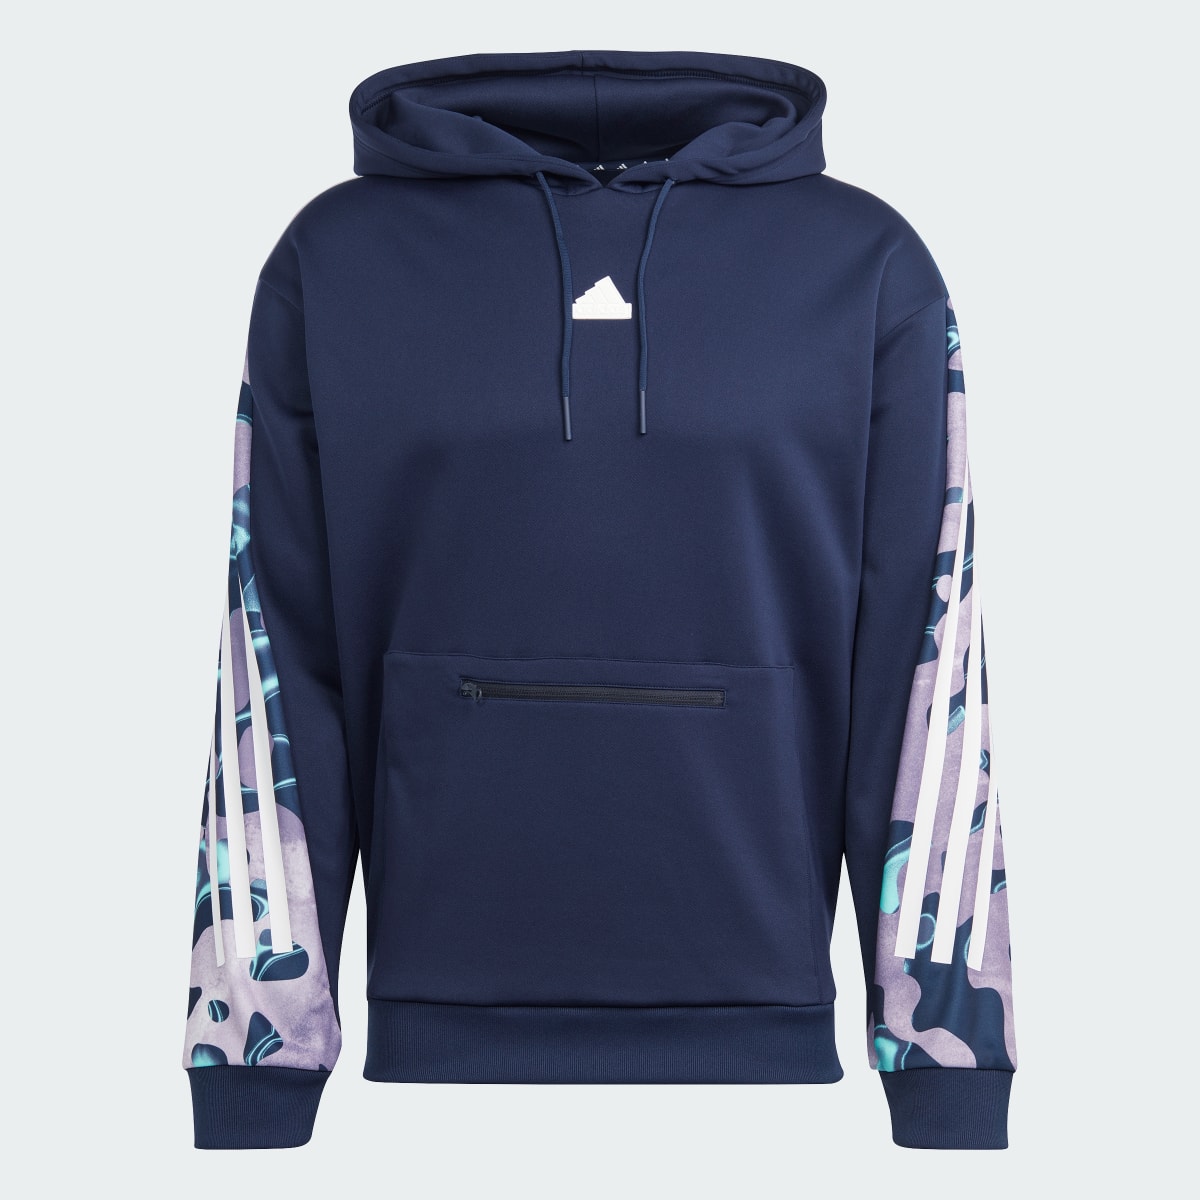 Adidas Future Icons Allover Print Hoodie. 5